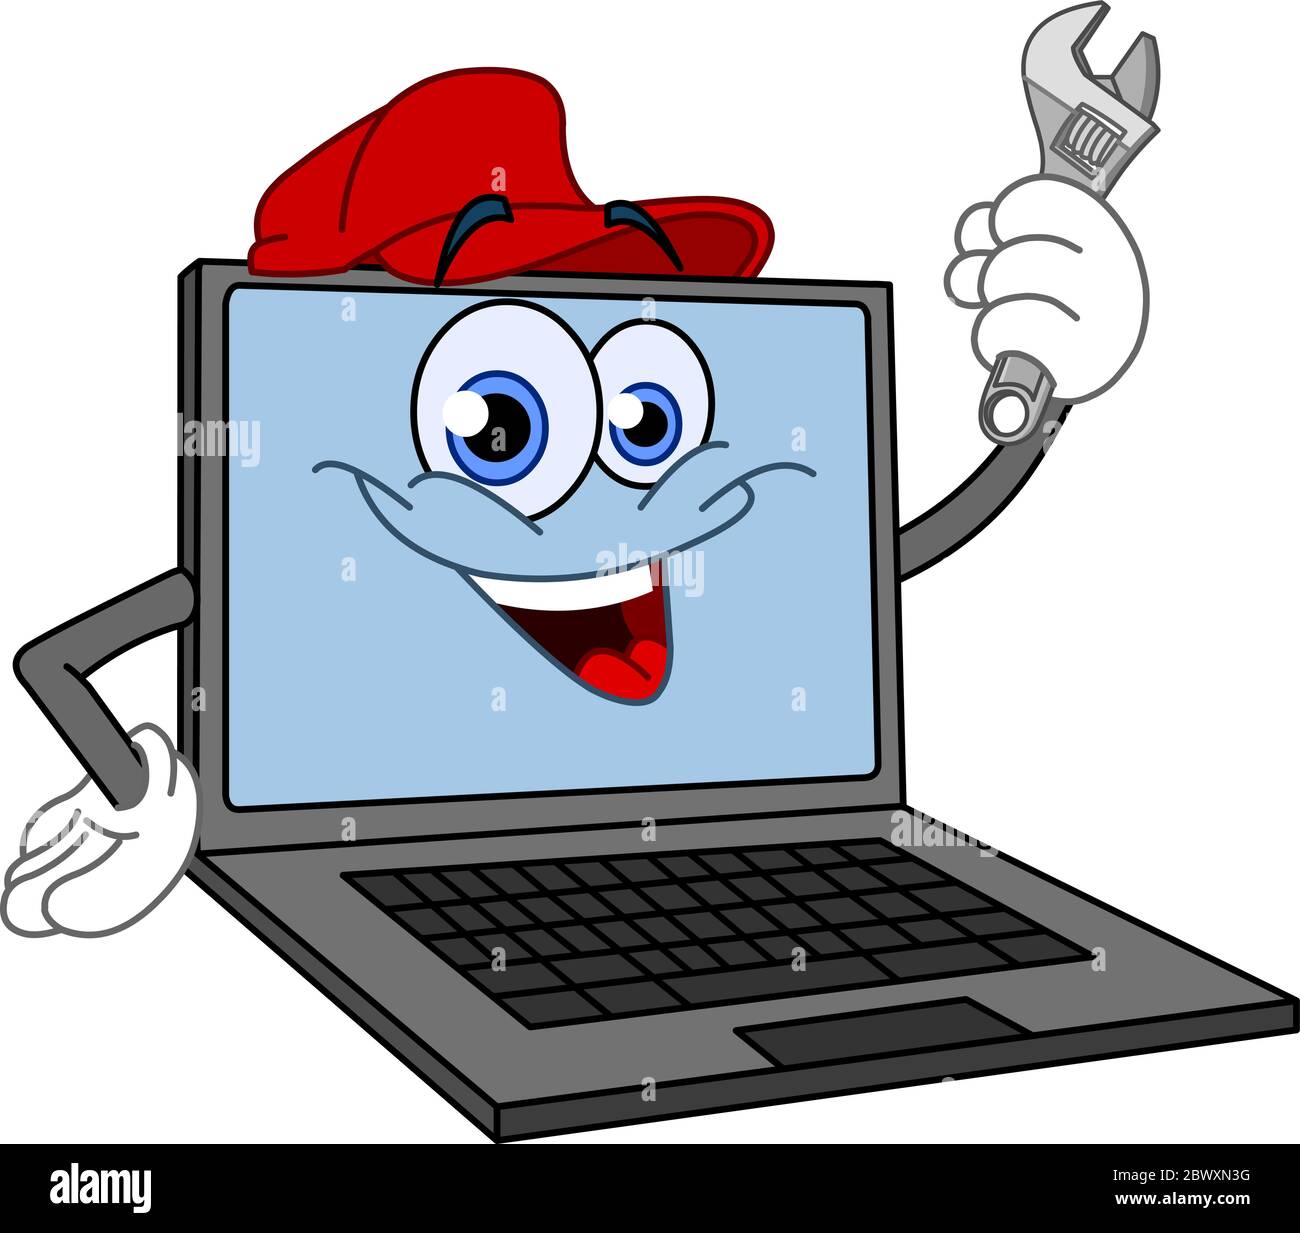 Cartoon computer holding a wrench Stock Vector